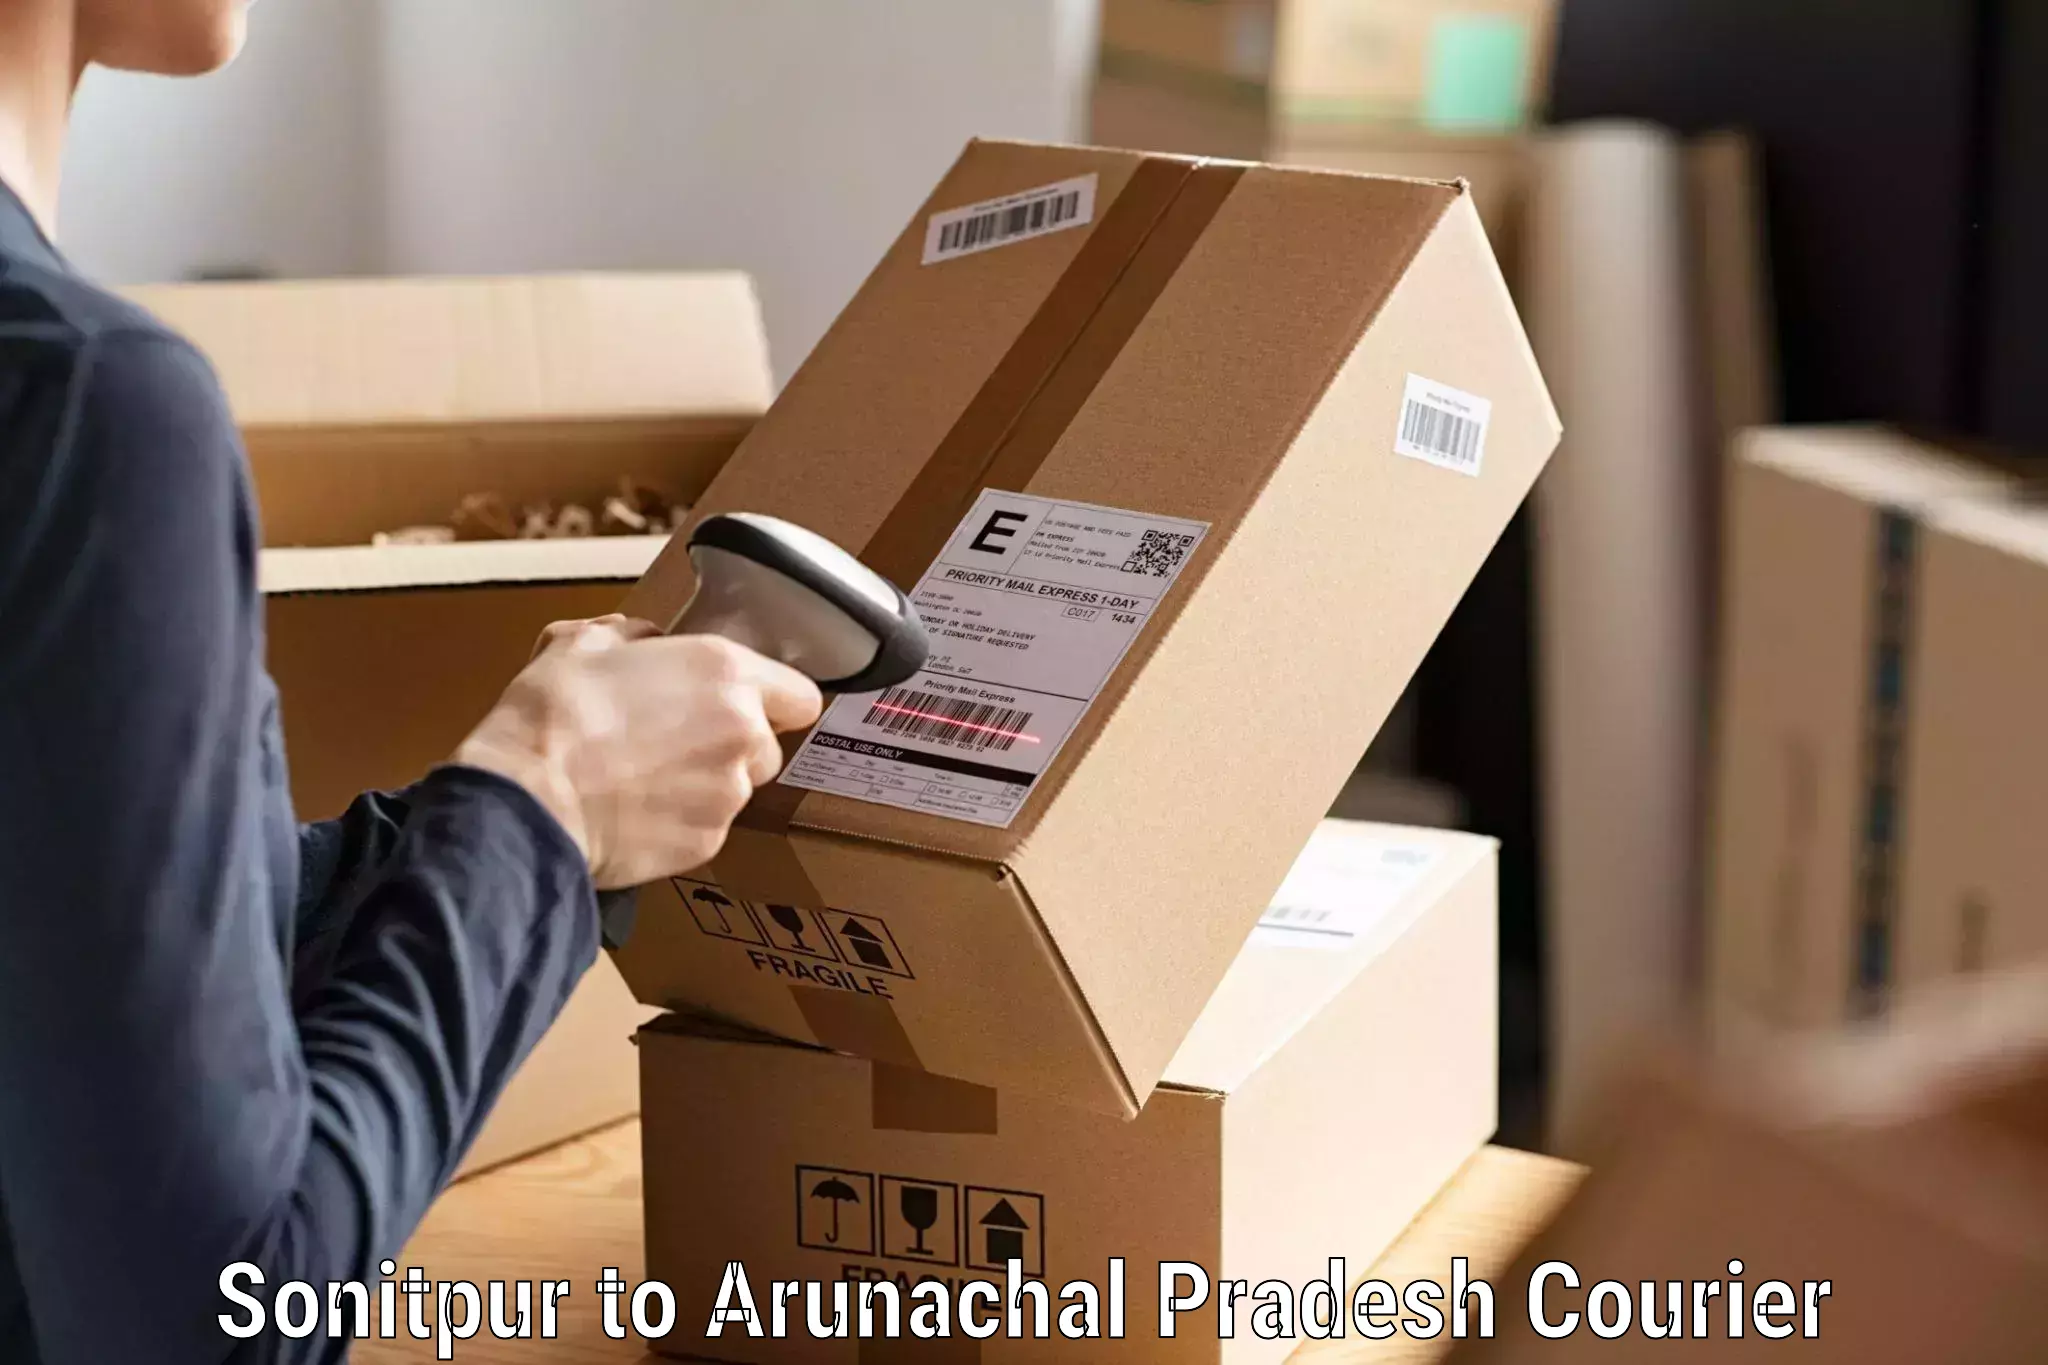 Efficient package consolidation Sonitpur to Changlang